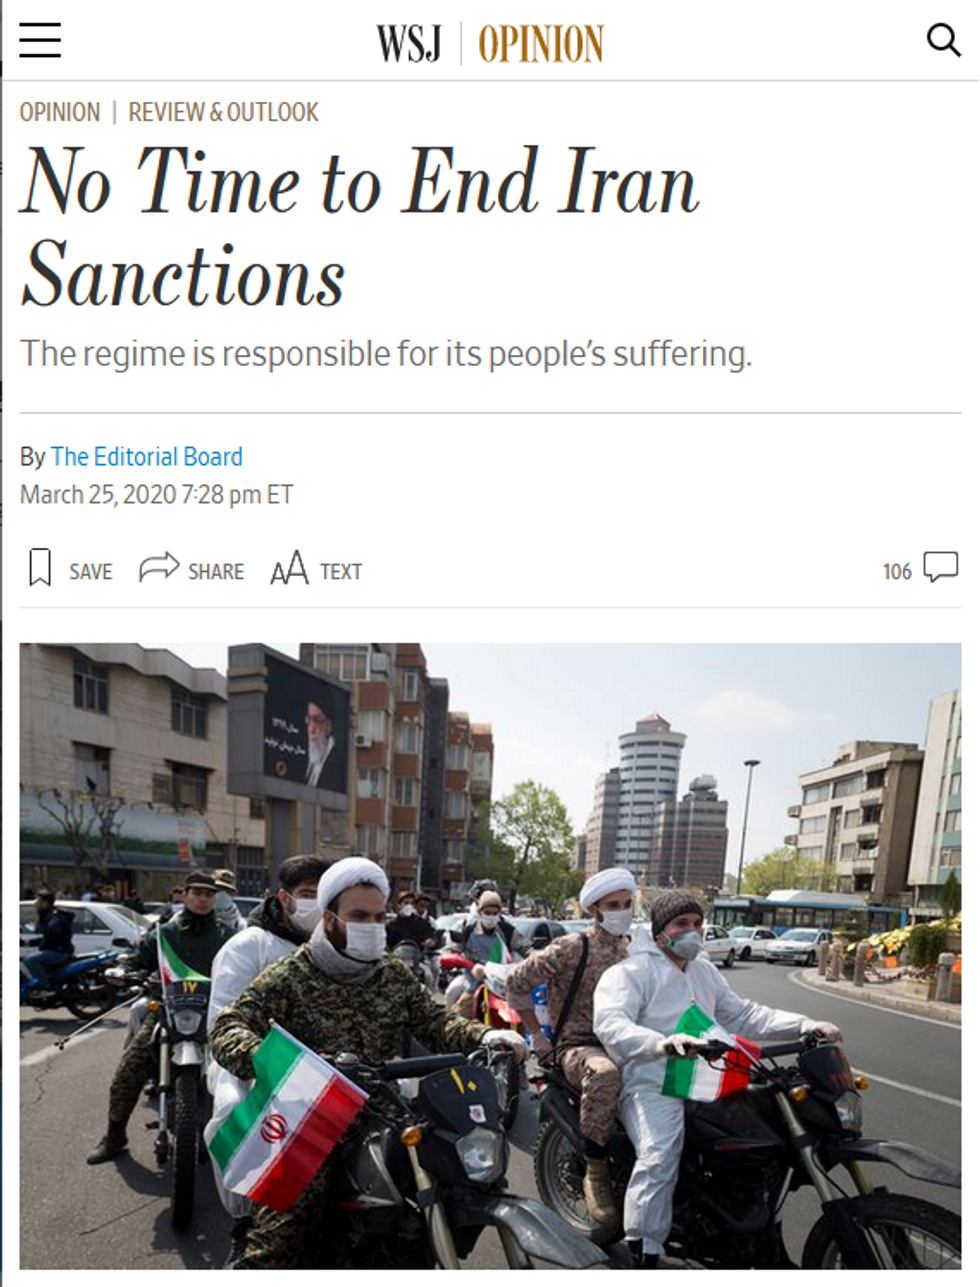 WSJ: No Time to End Iran Sanctions